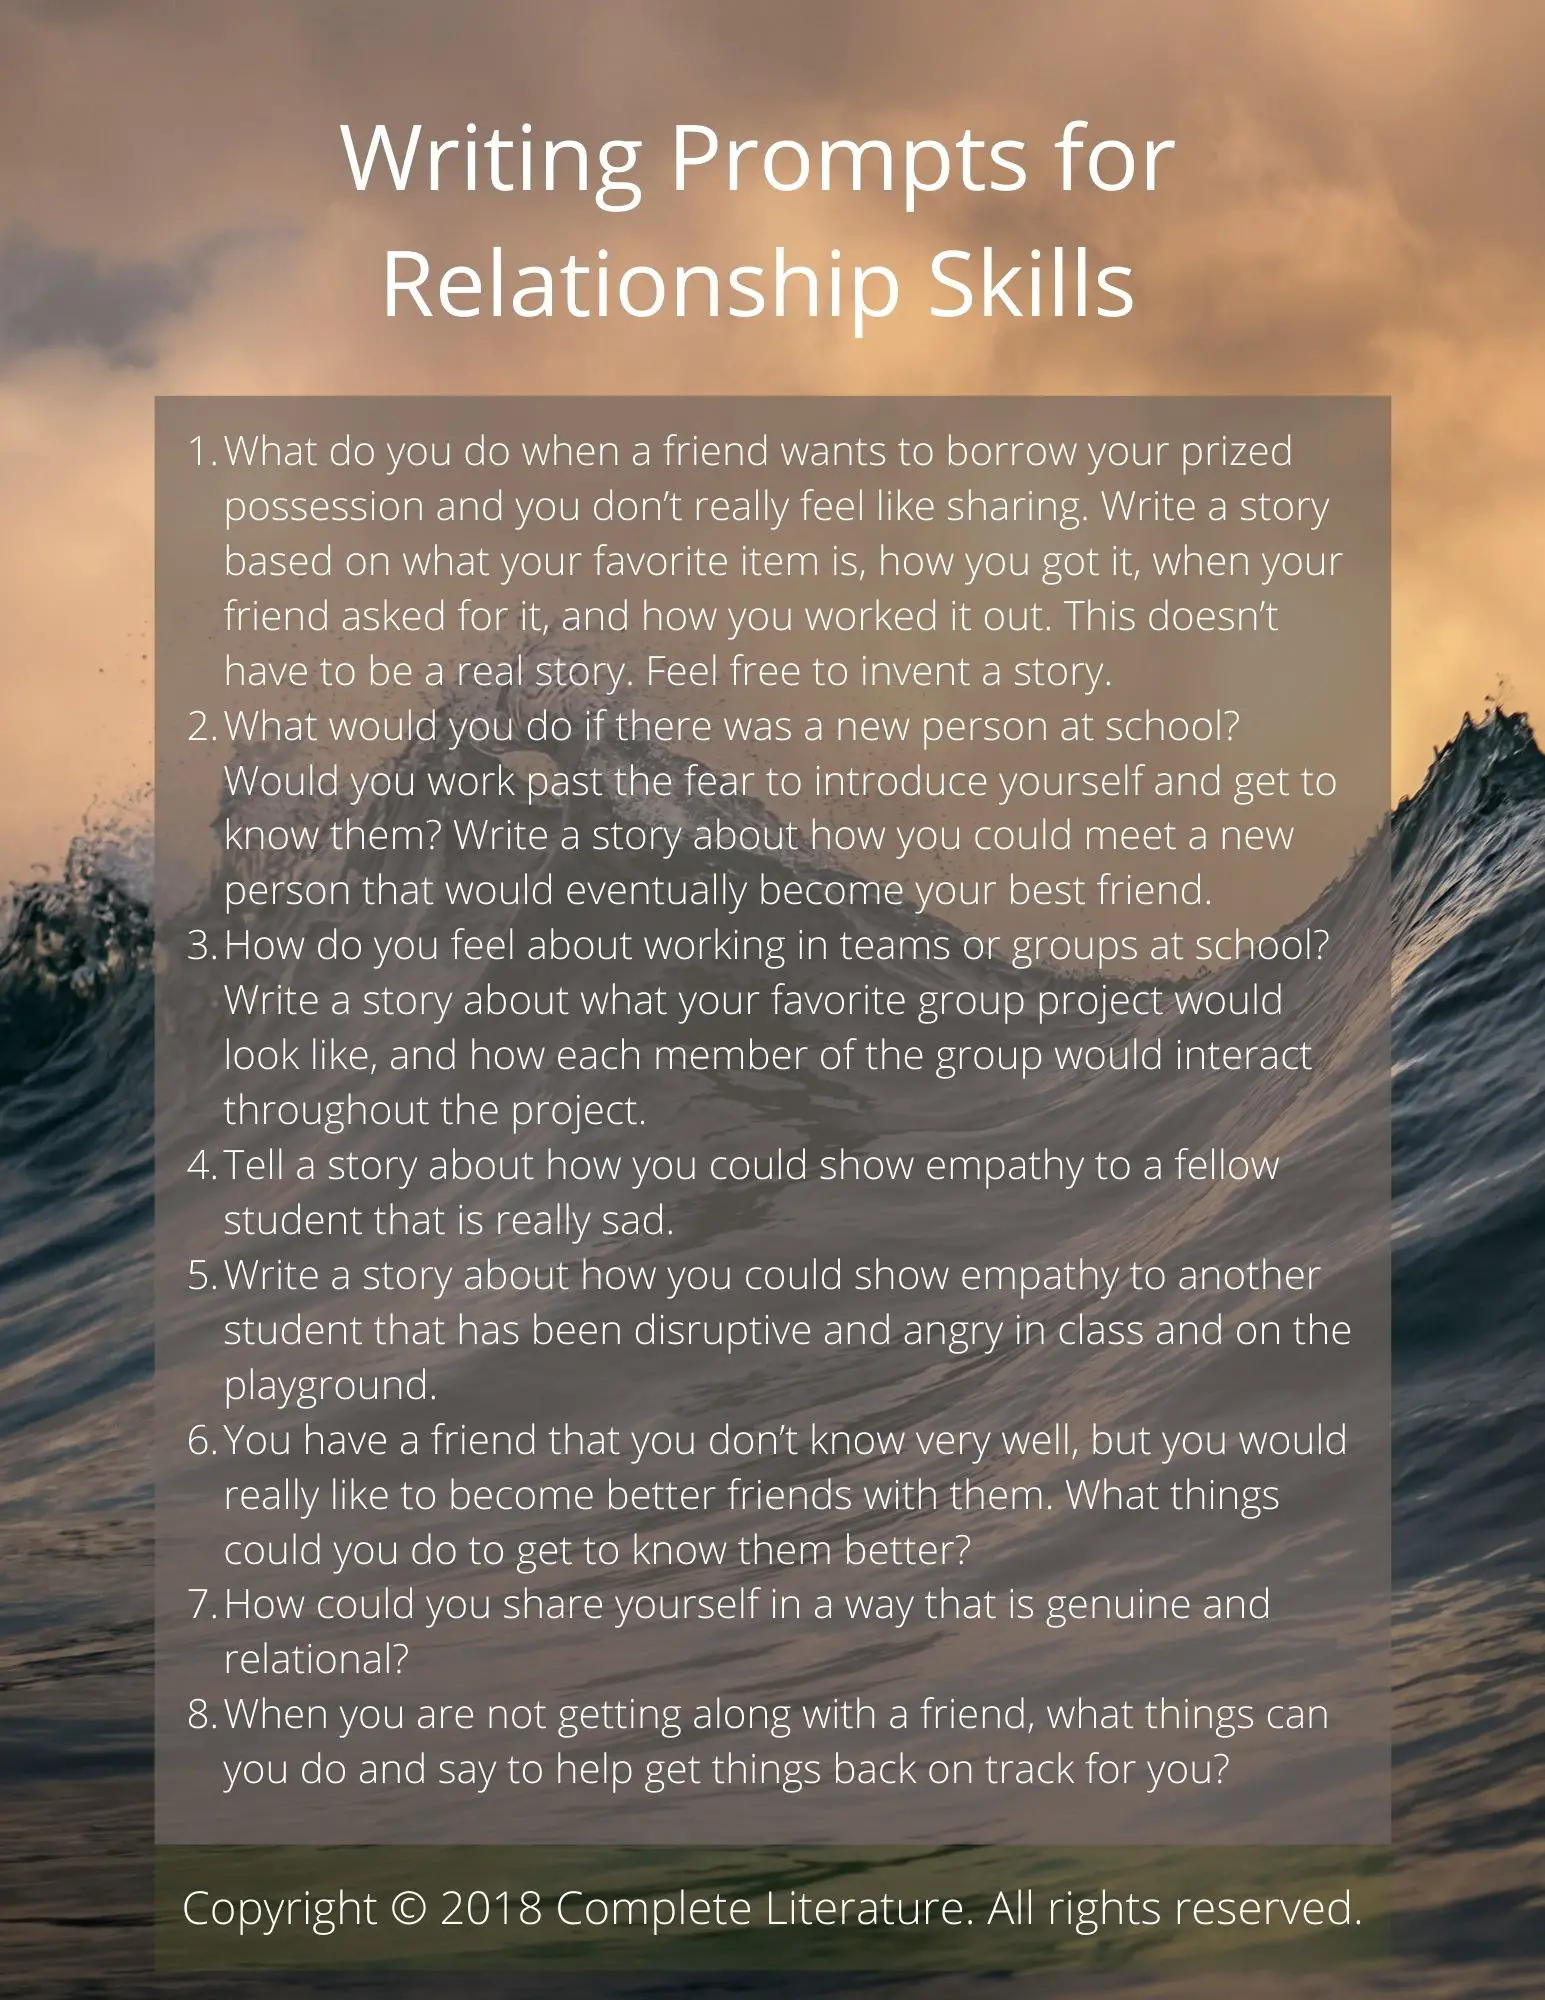 Writing Prompts for Relationship Skills